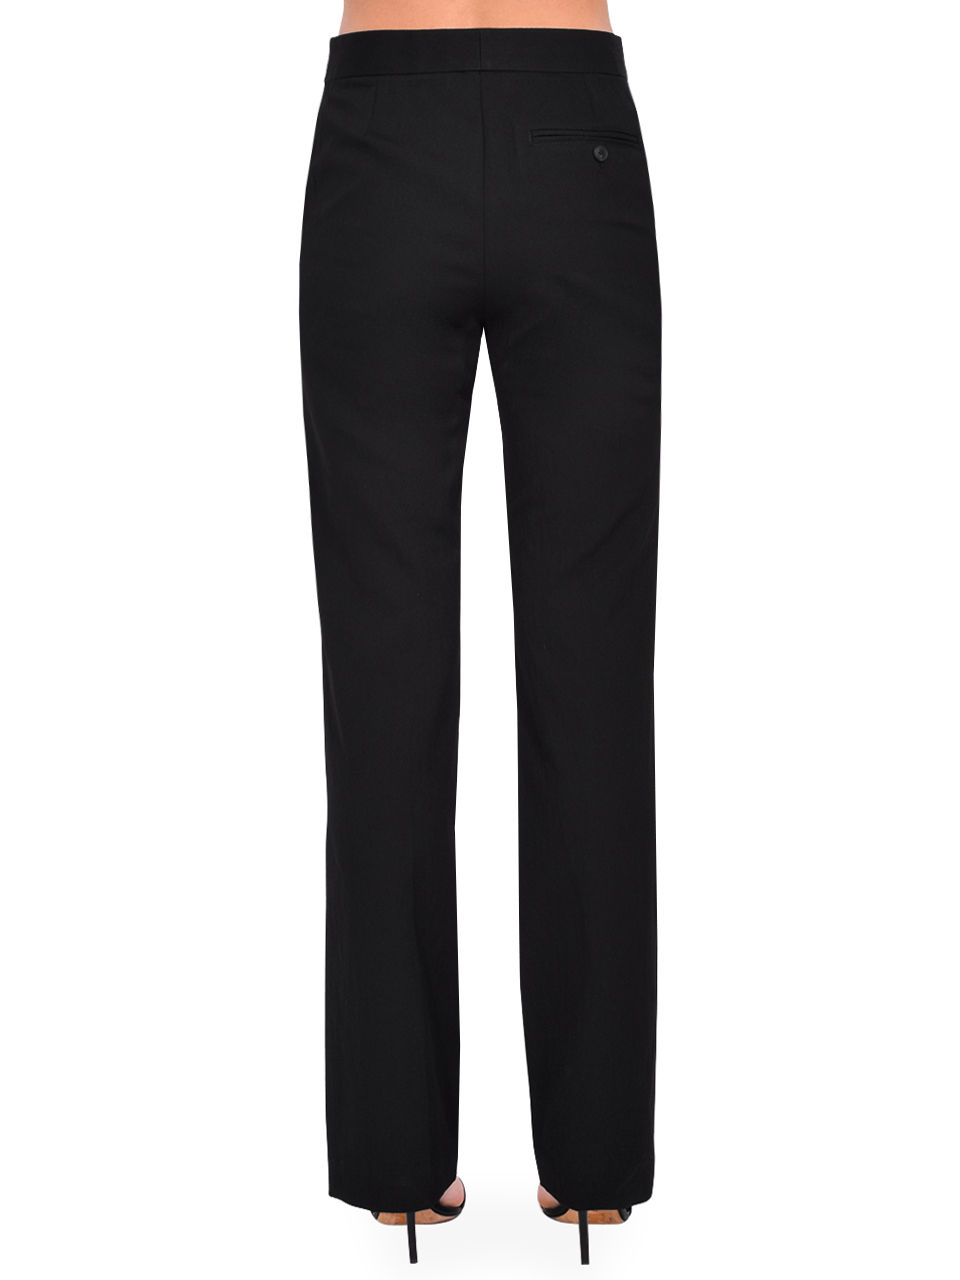 3.1 Phillip Lim Relaxed Wool Tailored Pant in Black Back View 